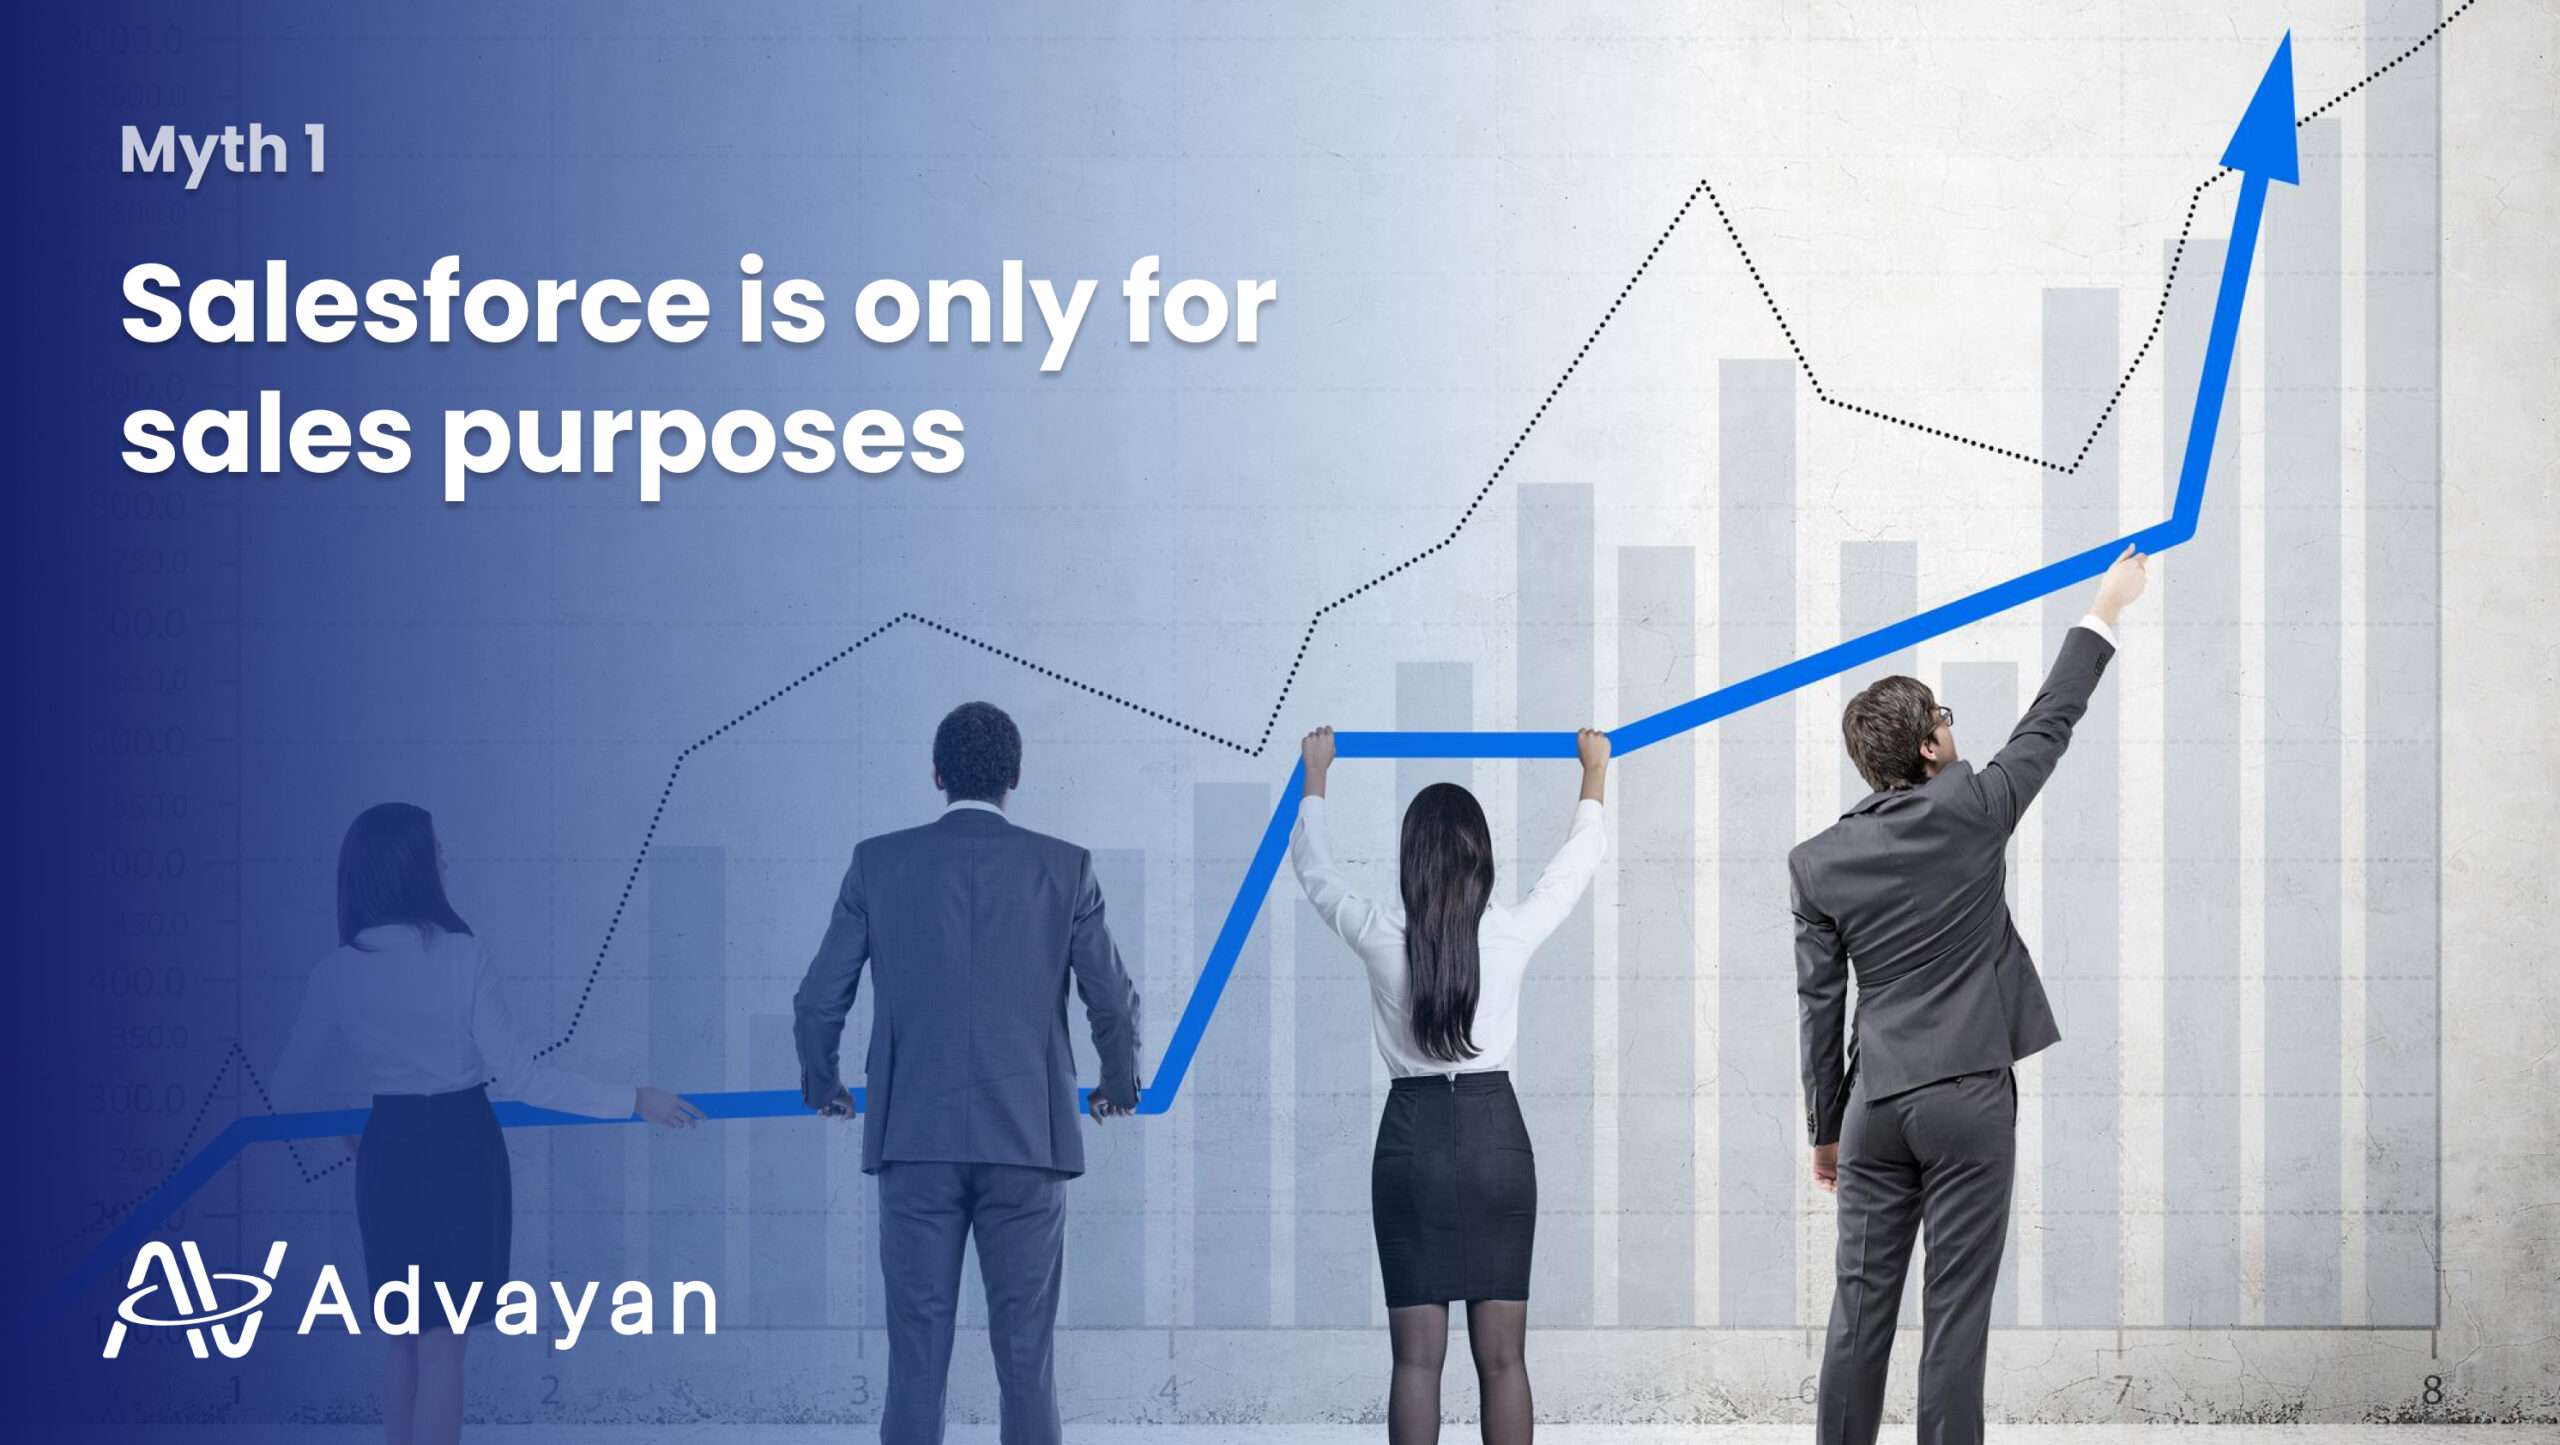 Myth 1 Salesforce is only for sales purposes